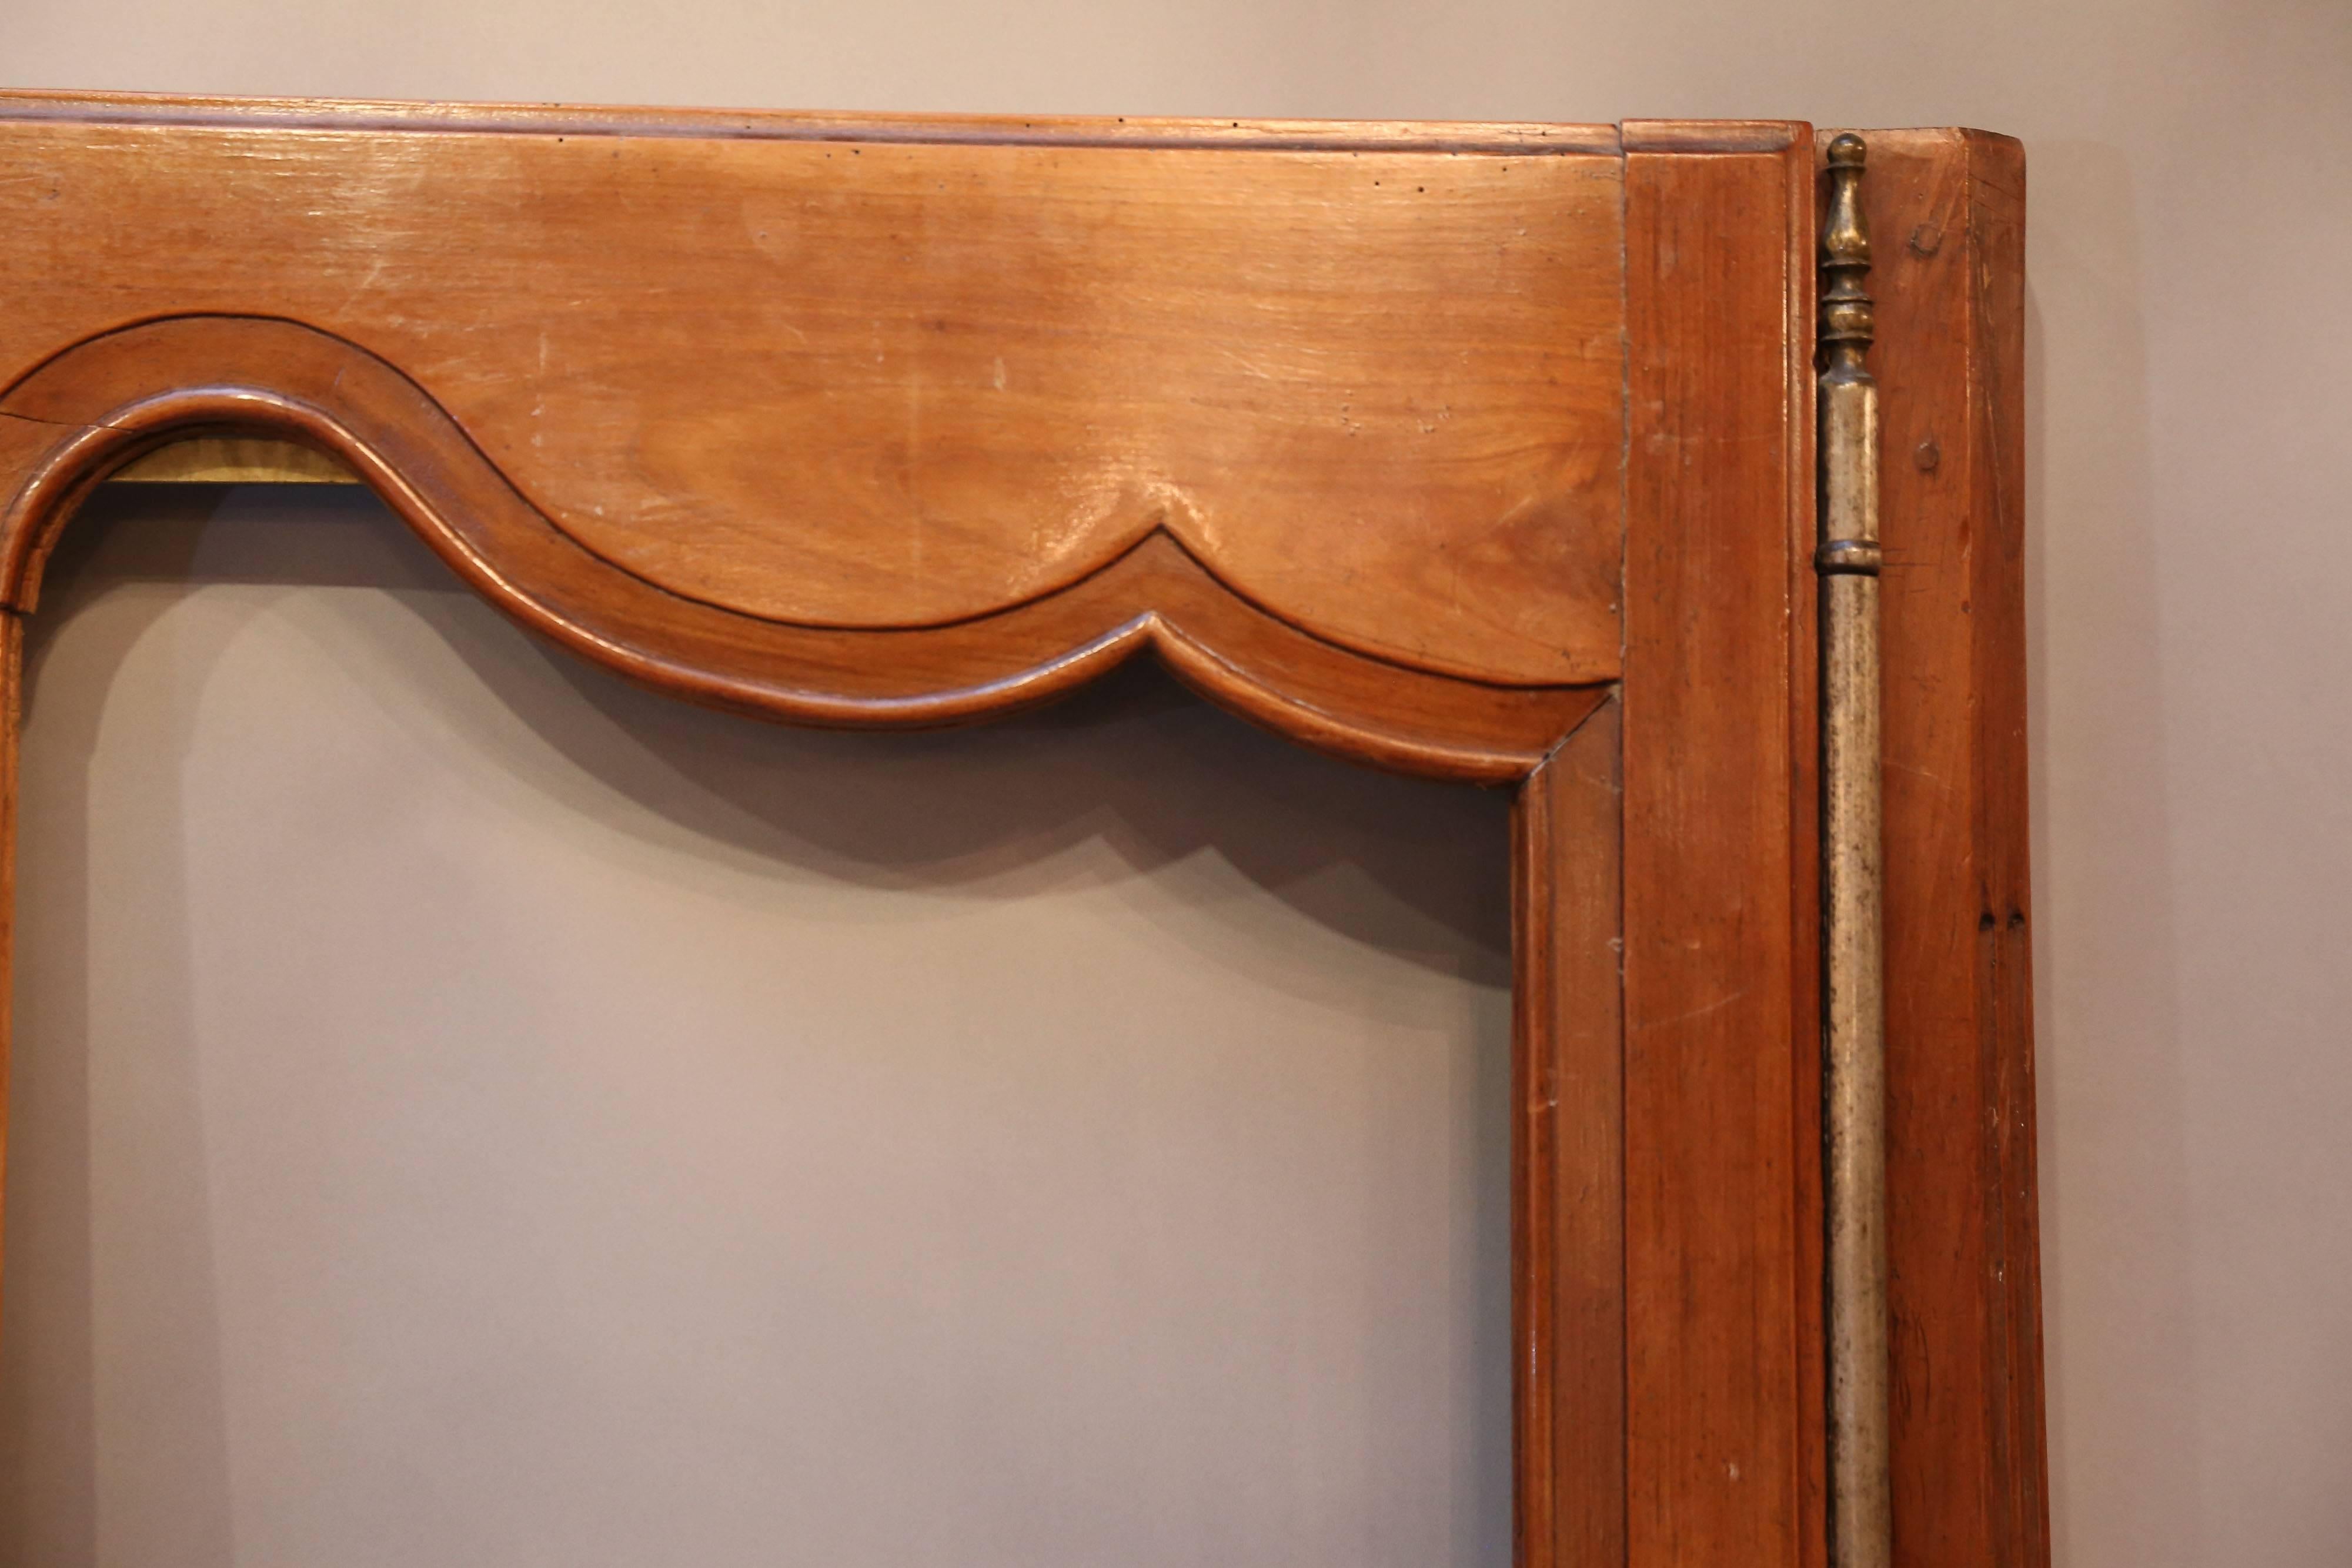 Pair of armoire doors panels include original hinges and
escutcheons.

Perfect for built-in cabinets.